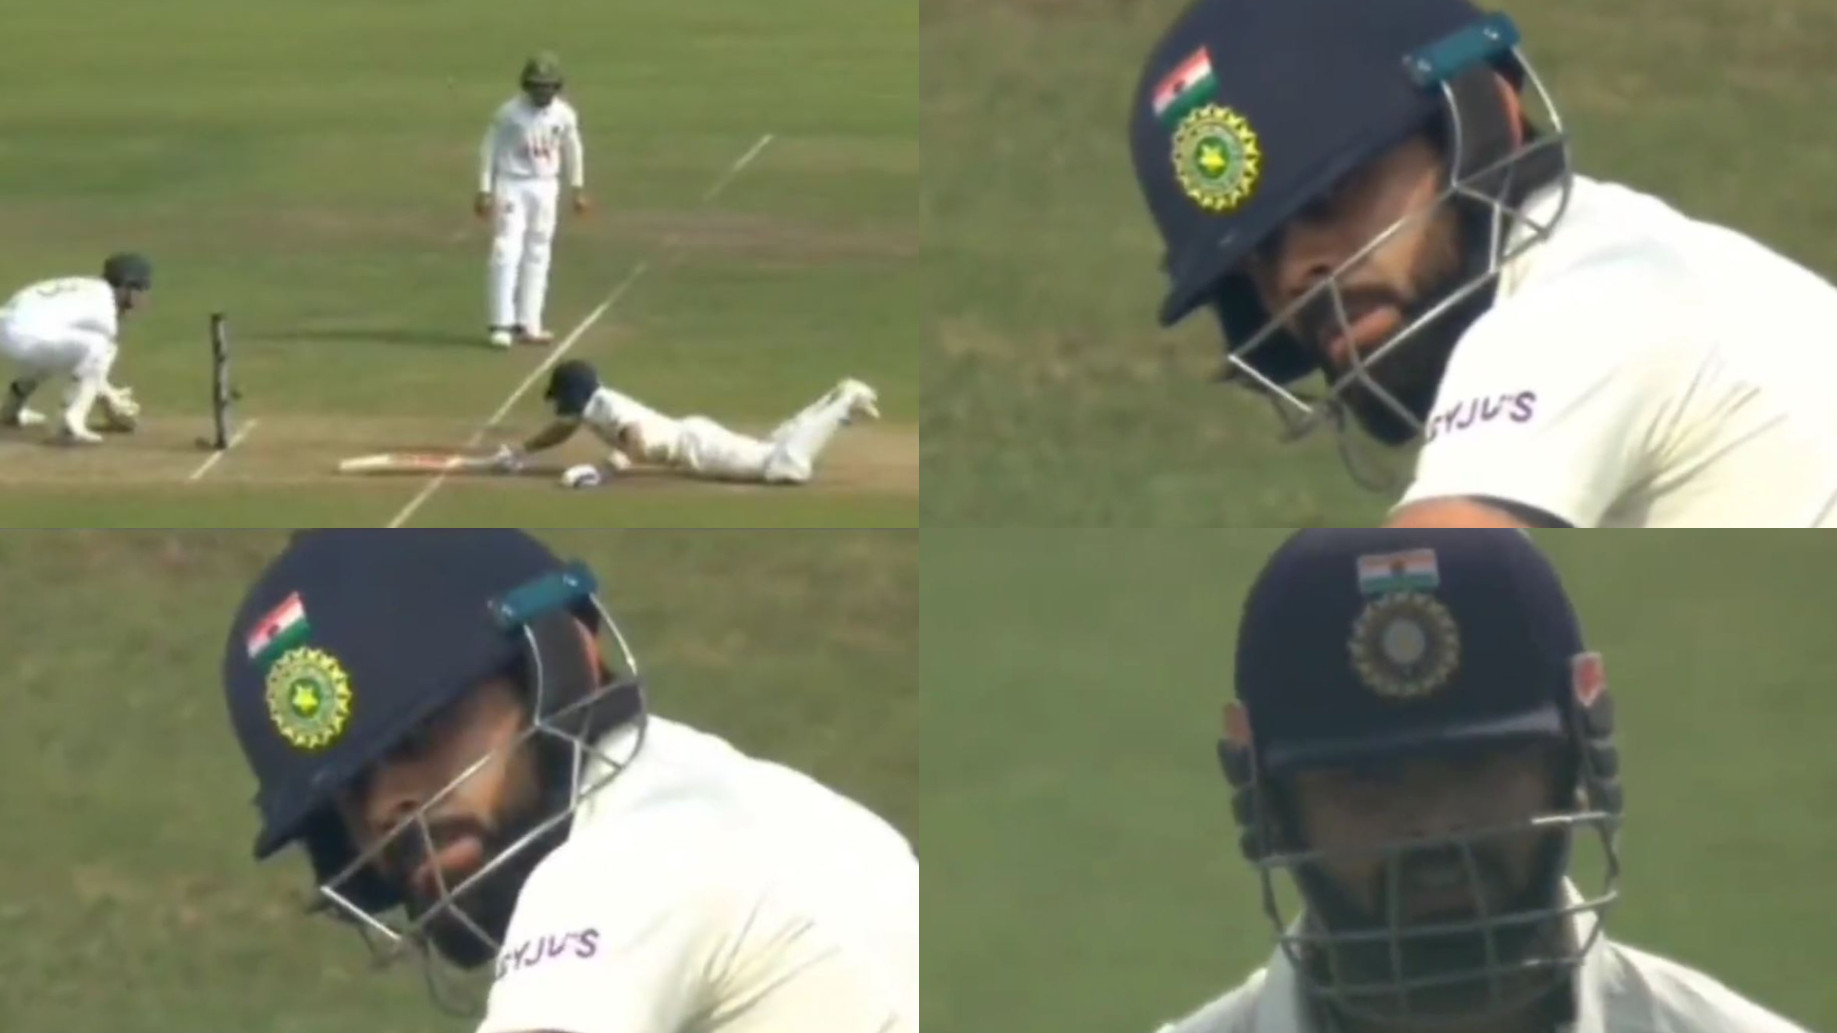 BAN v IND 2022: WATCH- Rishabh Pant refuses a quick single; Virat Kohli gives death glare to him after barely making ground